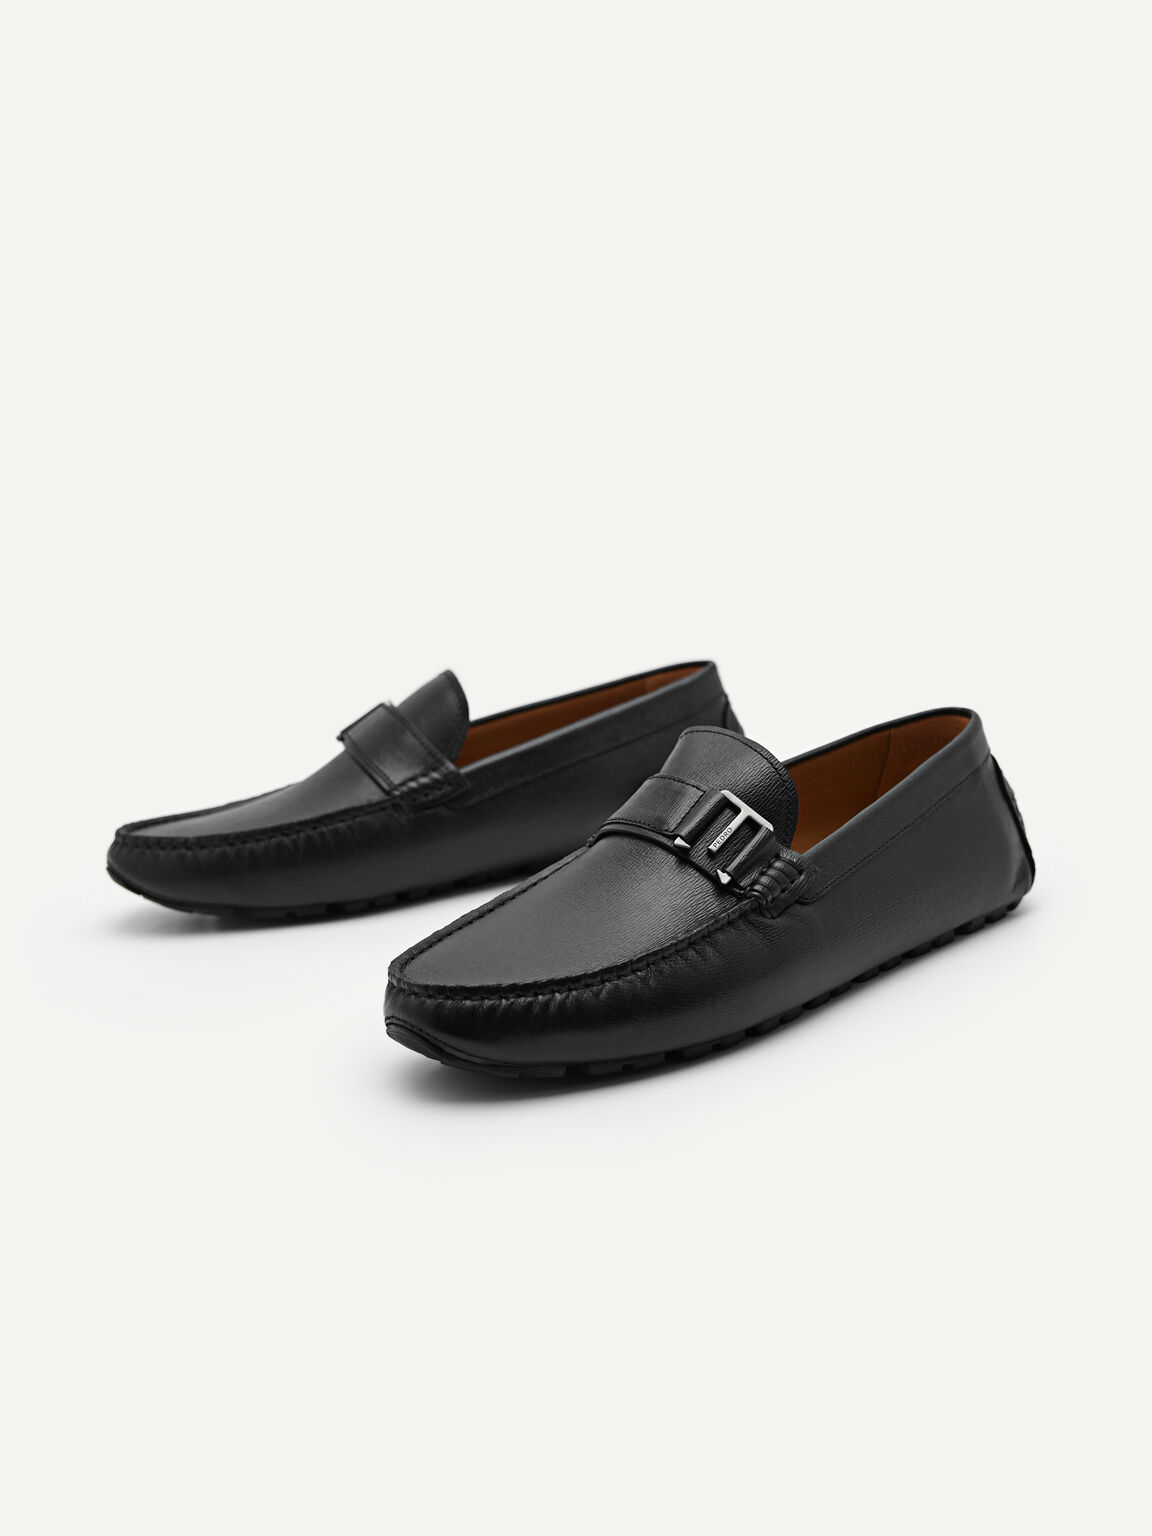 Leather Driving Moccassins, Black